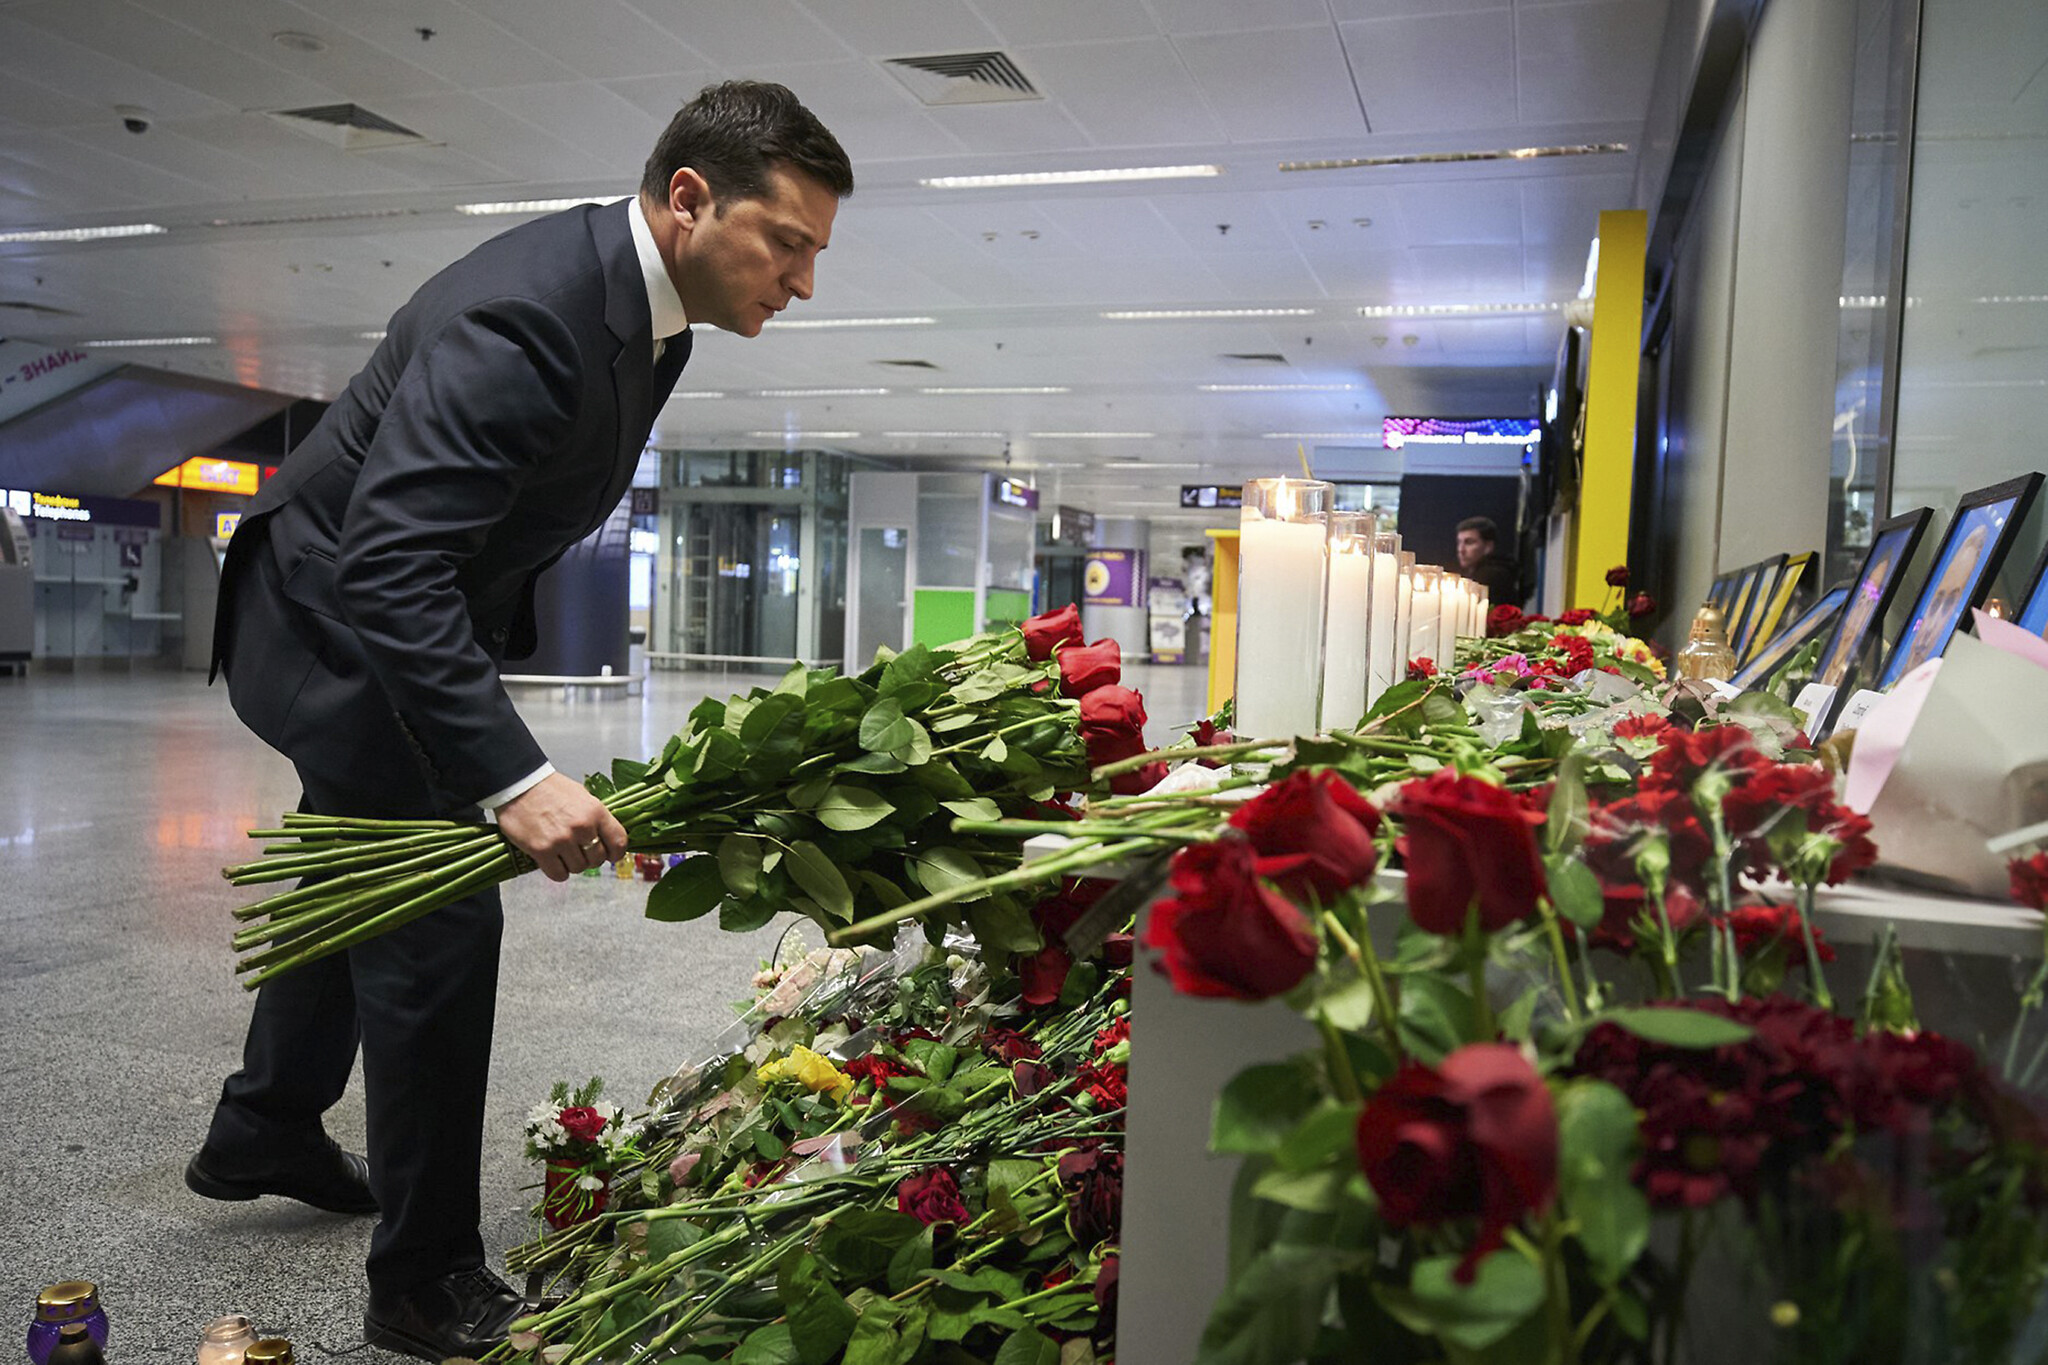 Ukrainian President Volodymyr Zelensky lays flowers at a memorial of the flight crew members of the Ukrainian 737-800 plane that crashed on the outskirts of Tehran, at Borispil international airport outside in Kyiv, Ukraine, January 9, 2020. (Ukrainian Presidential Press Office via AP)